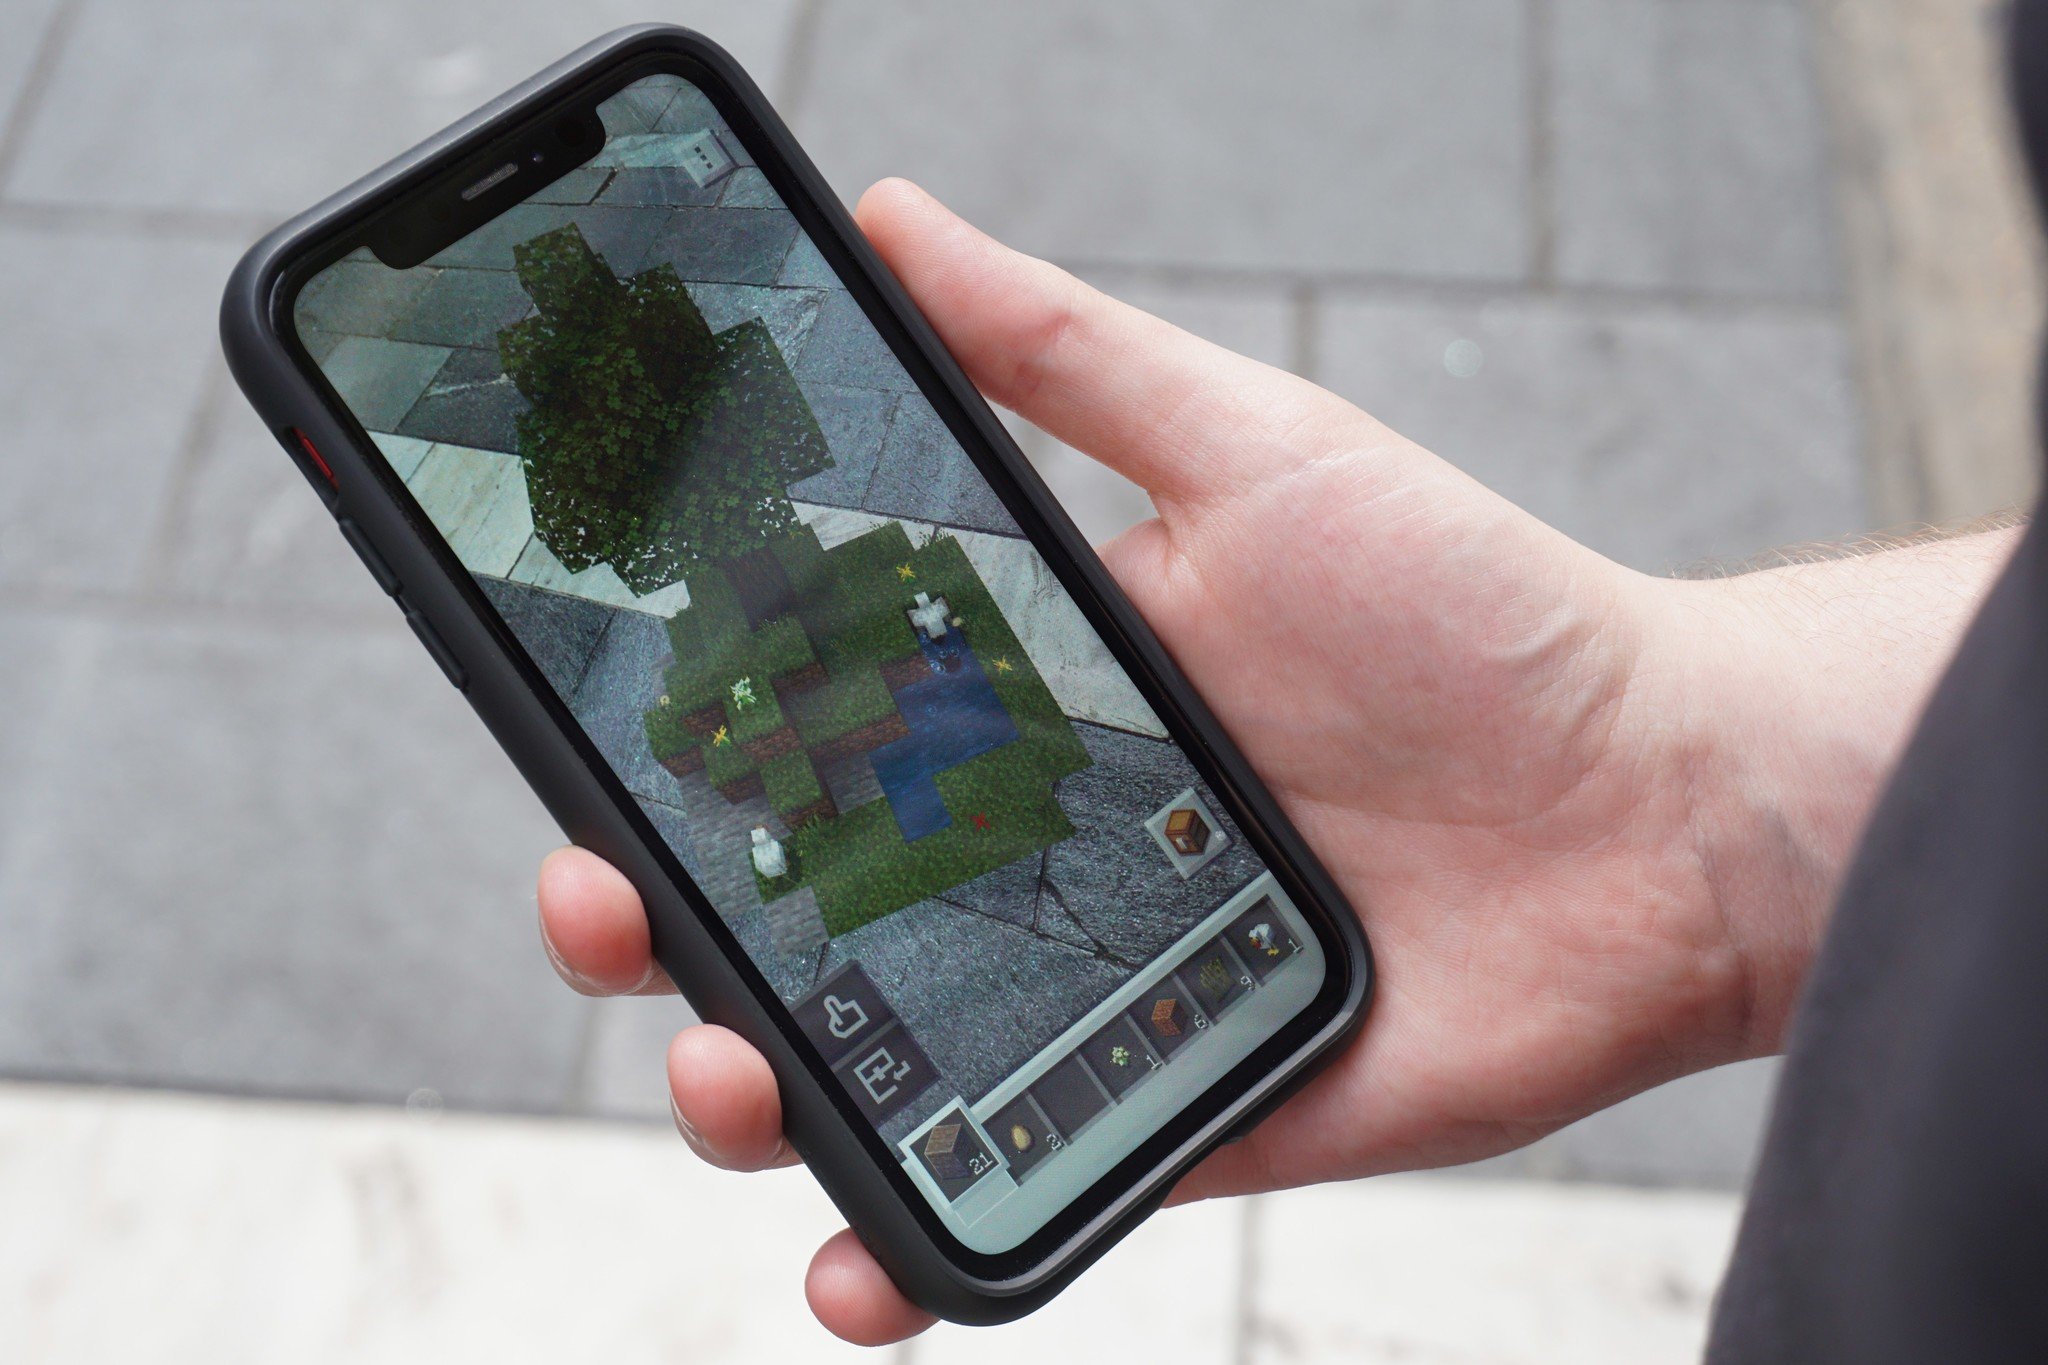 Minecraft Earth' Smartphone Game Is Like 'Pokémon Go', Will Be Free